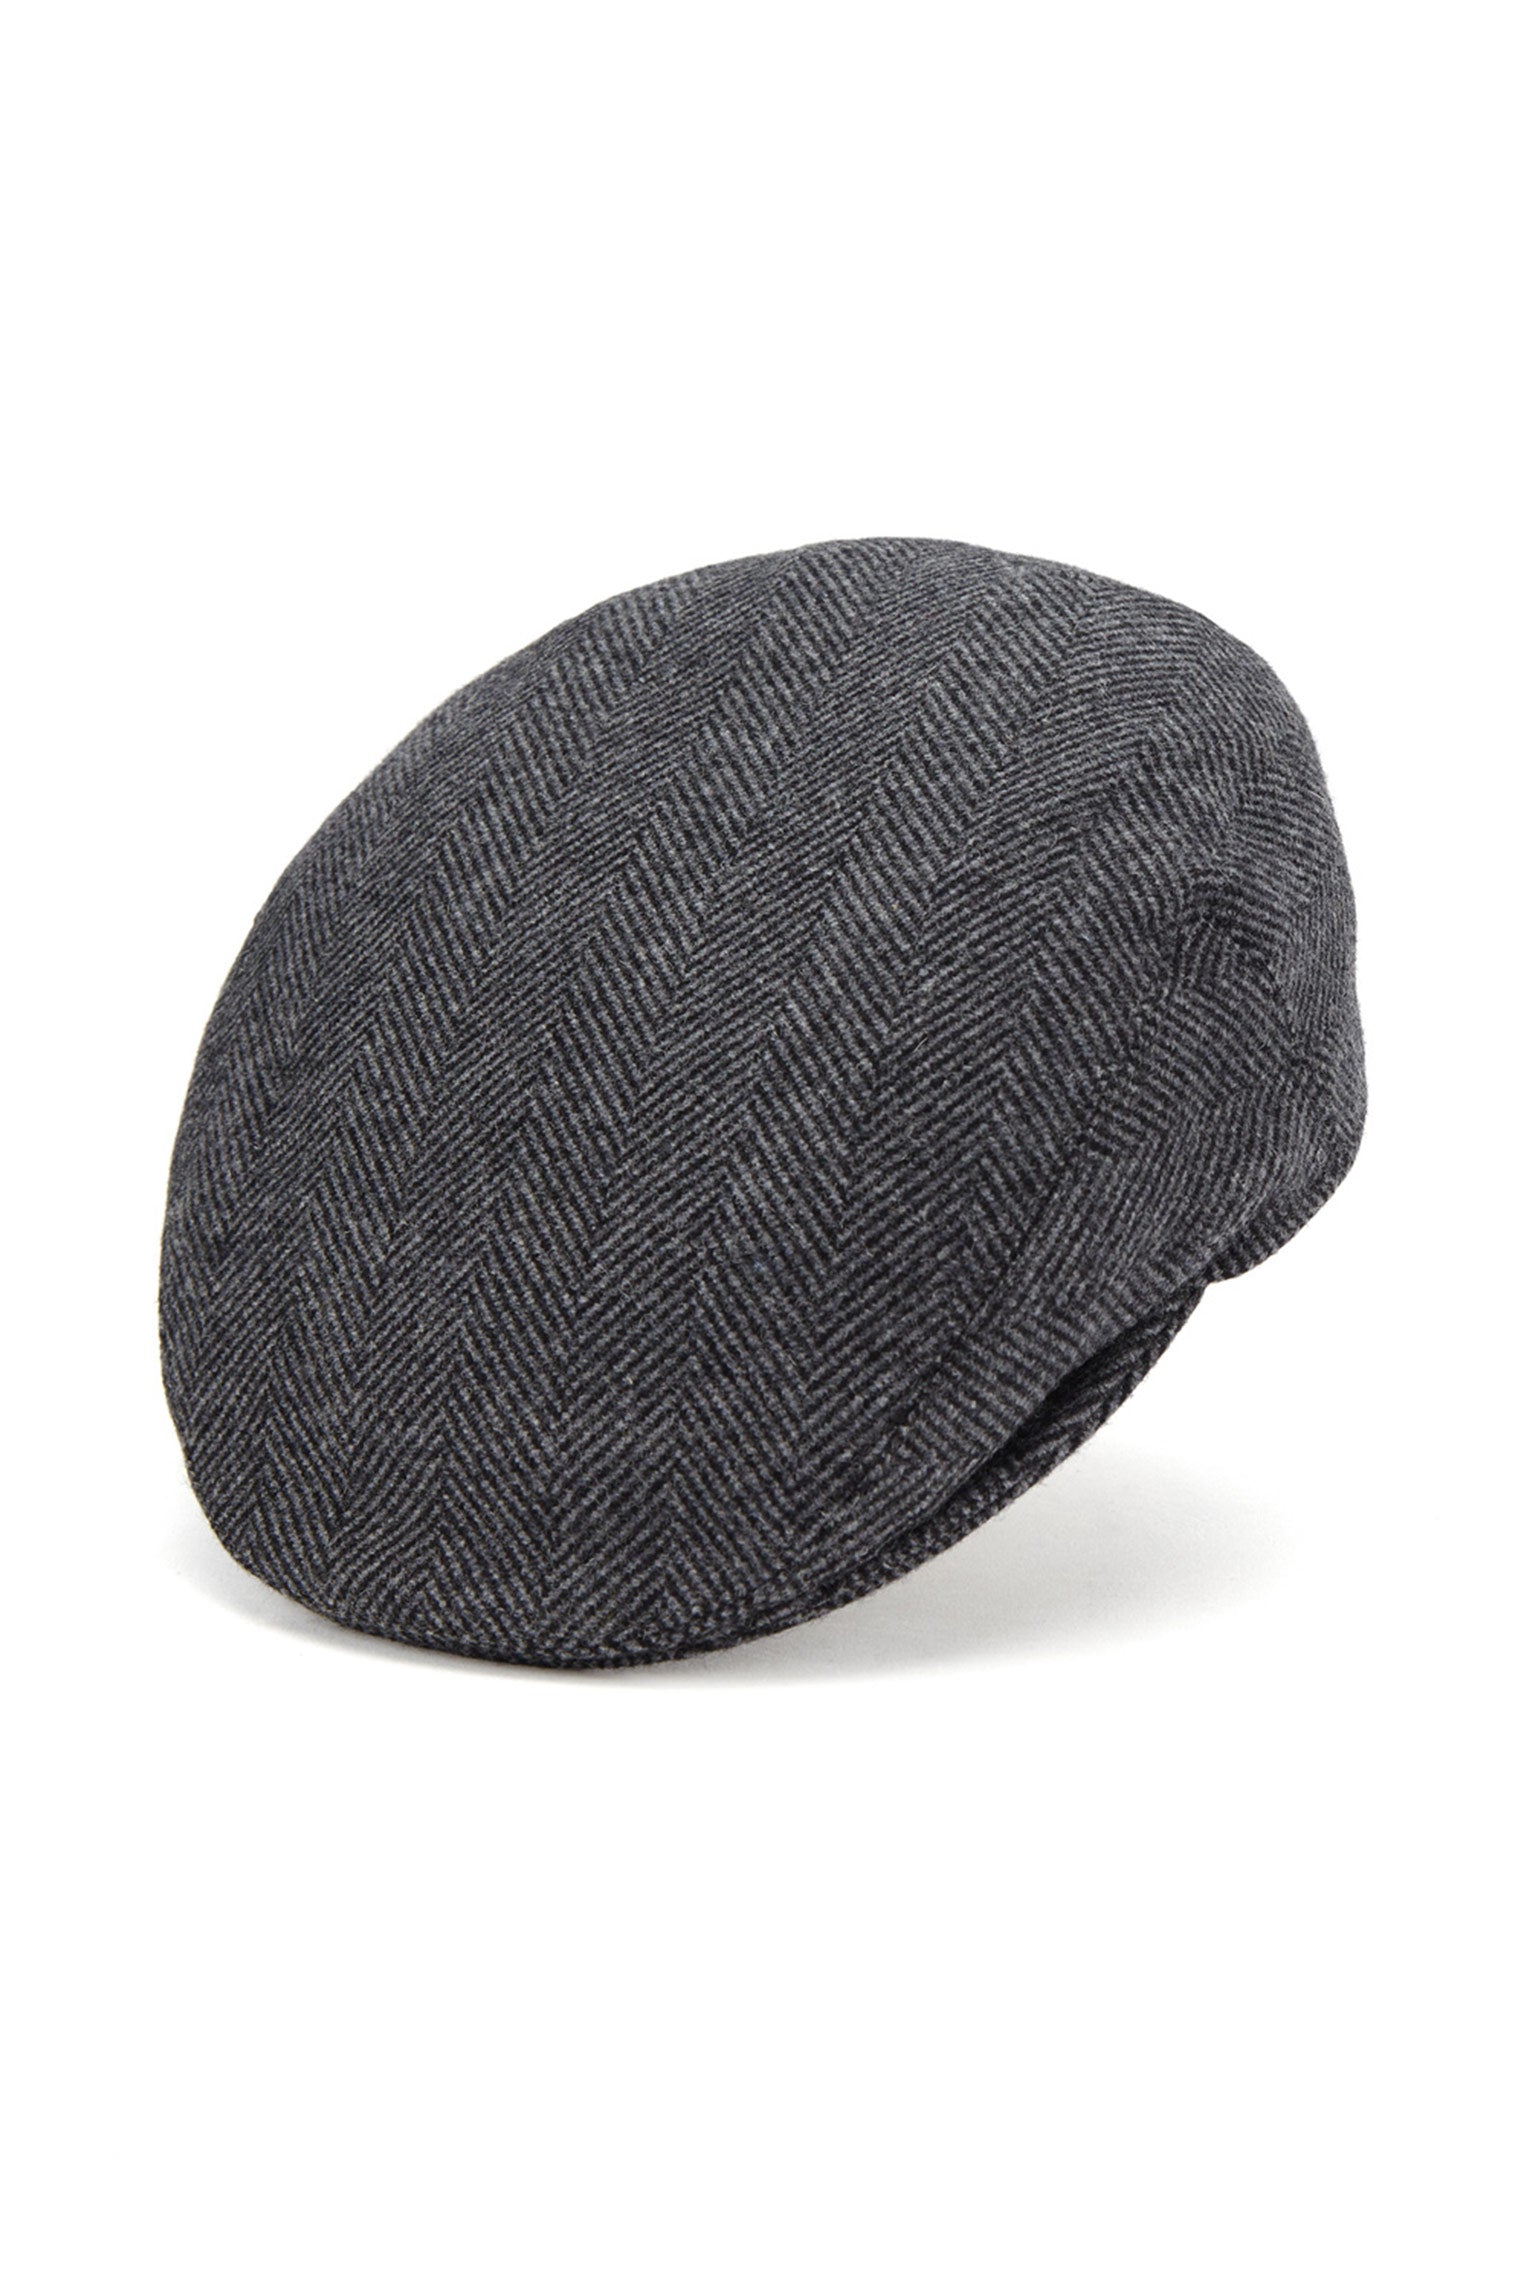 Gill Flat Cap - You May Also Like - Lock & Co. Hatters London UK